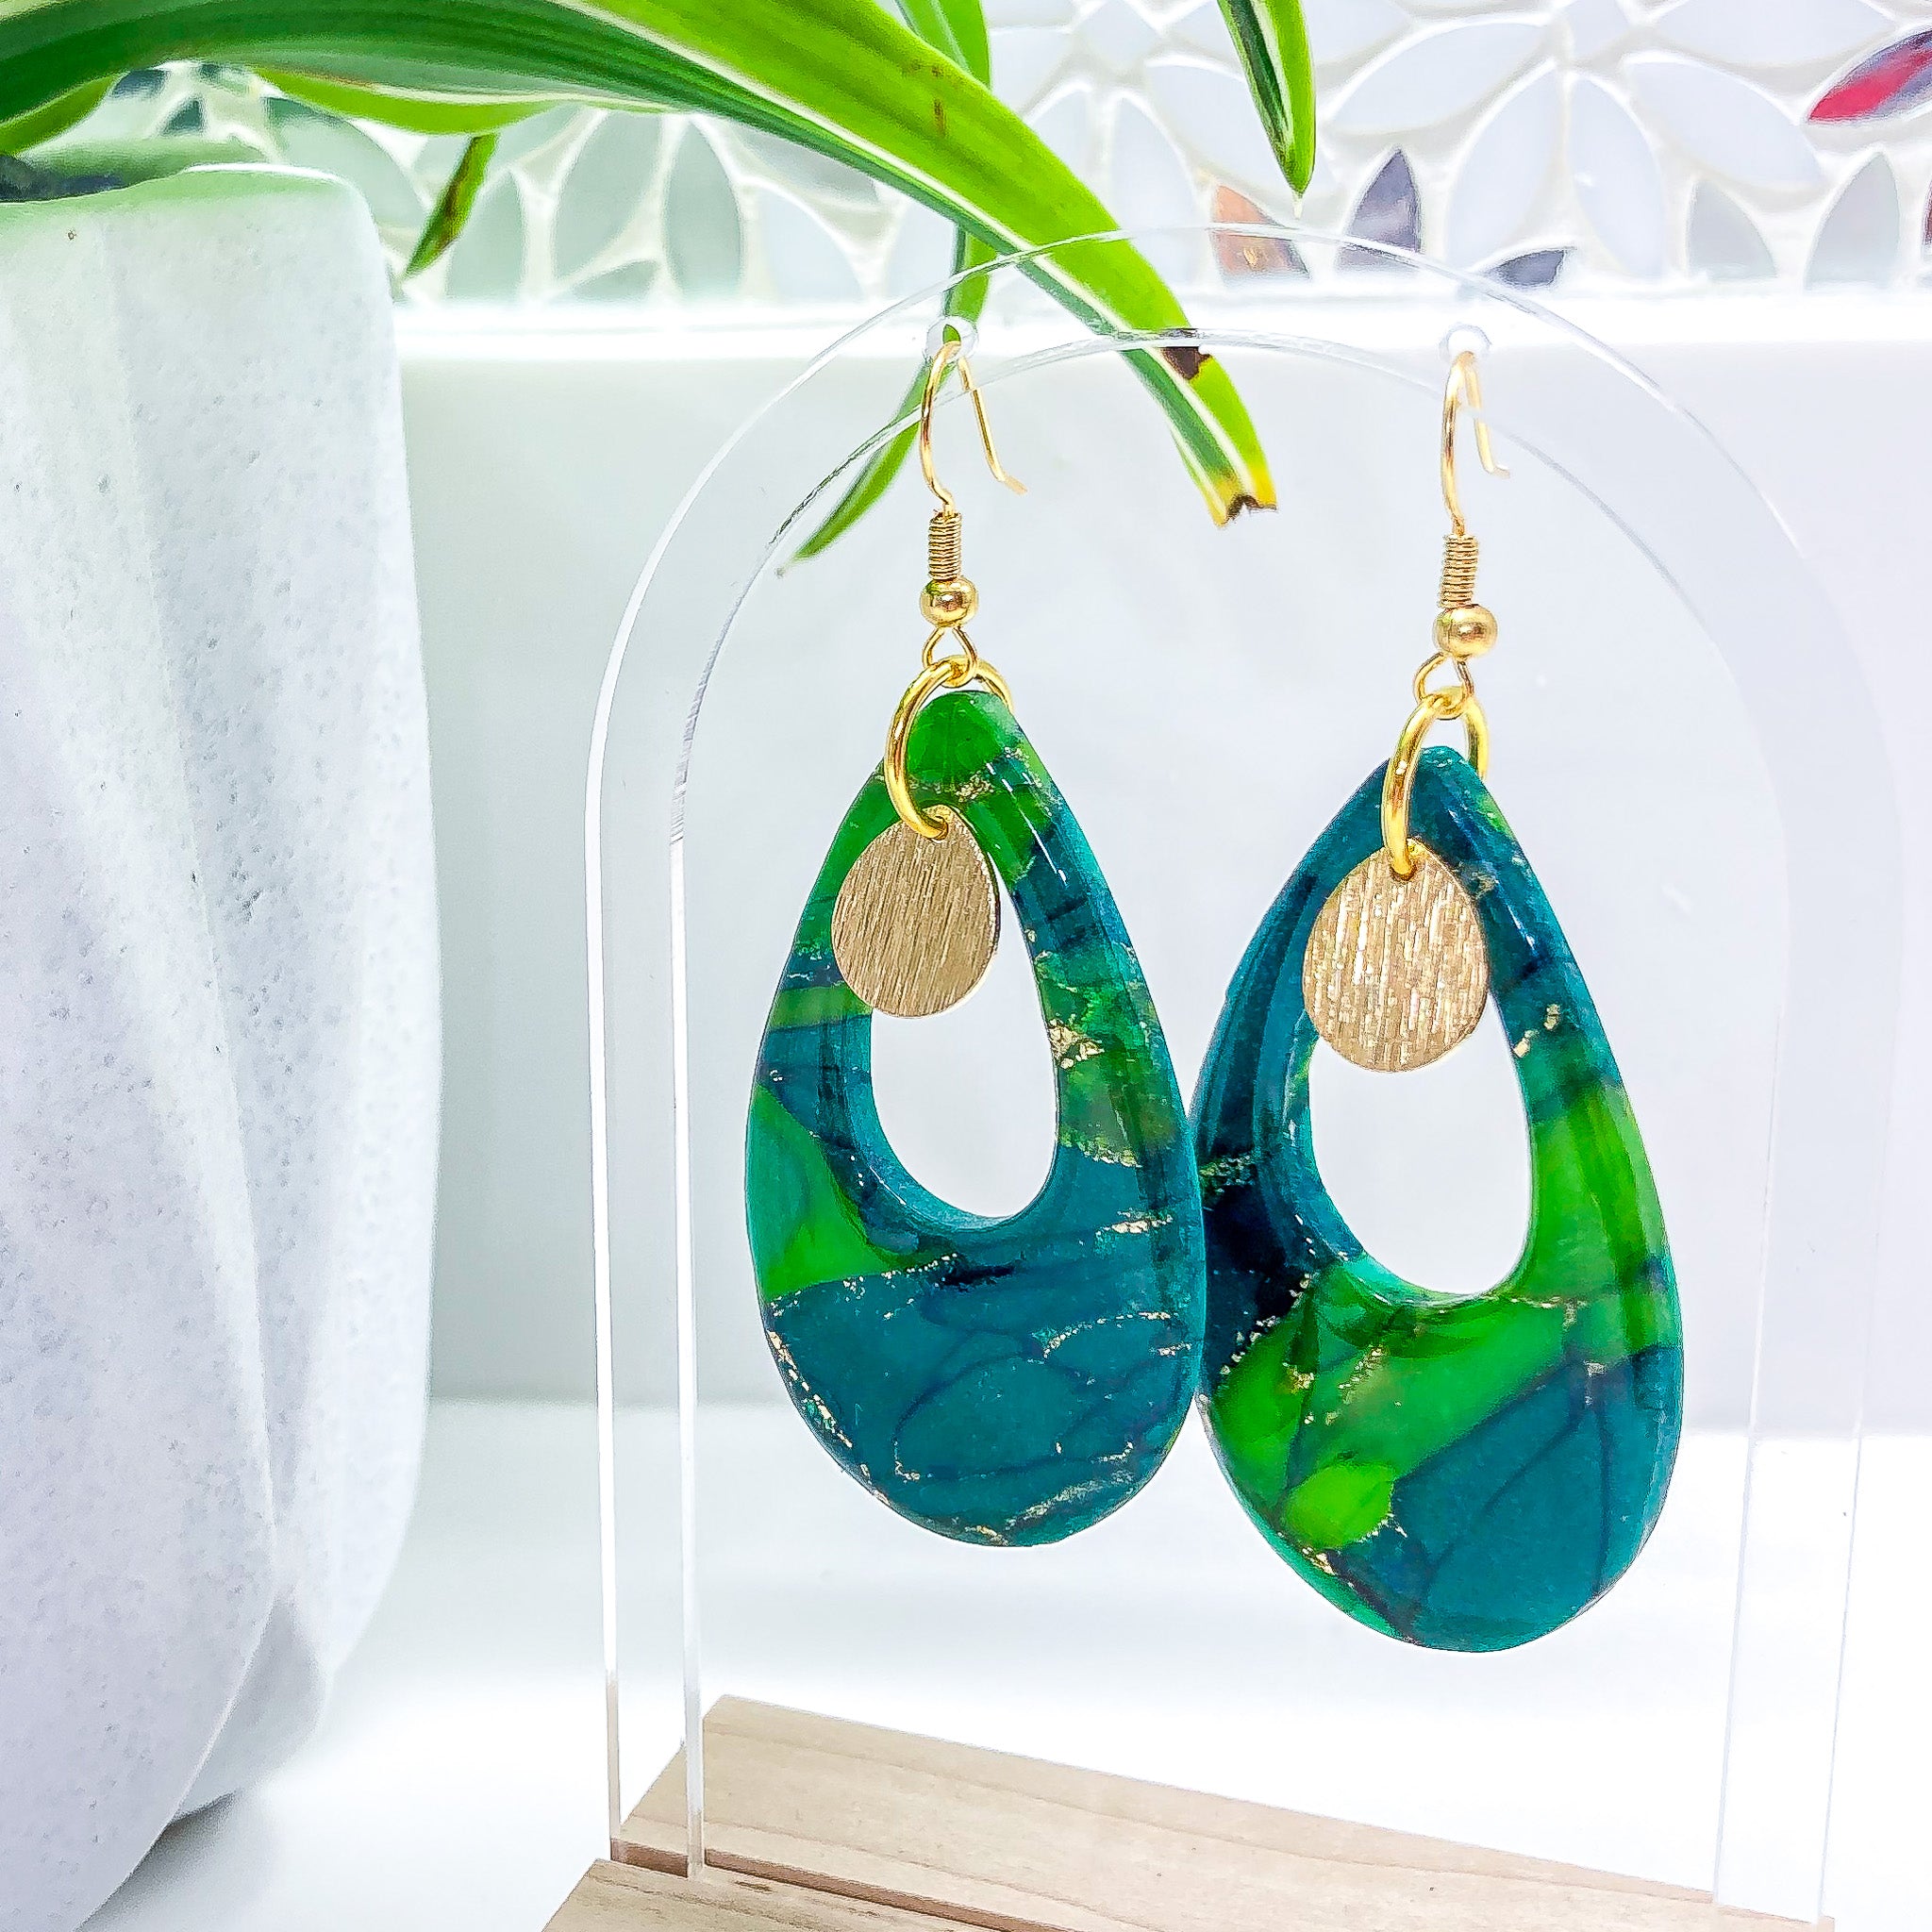 Elegant teardrop-shaped polymer clay earrings featuring a marbled emerald and teal design with a brushed gold disc, showcased against a modern white display and green foliage background.